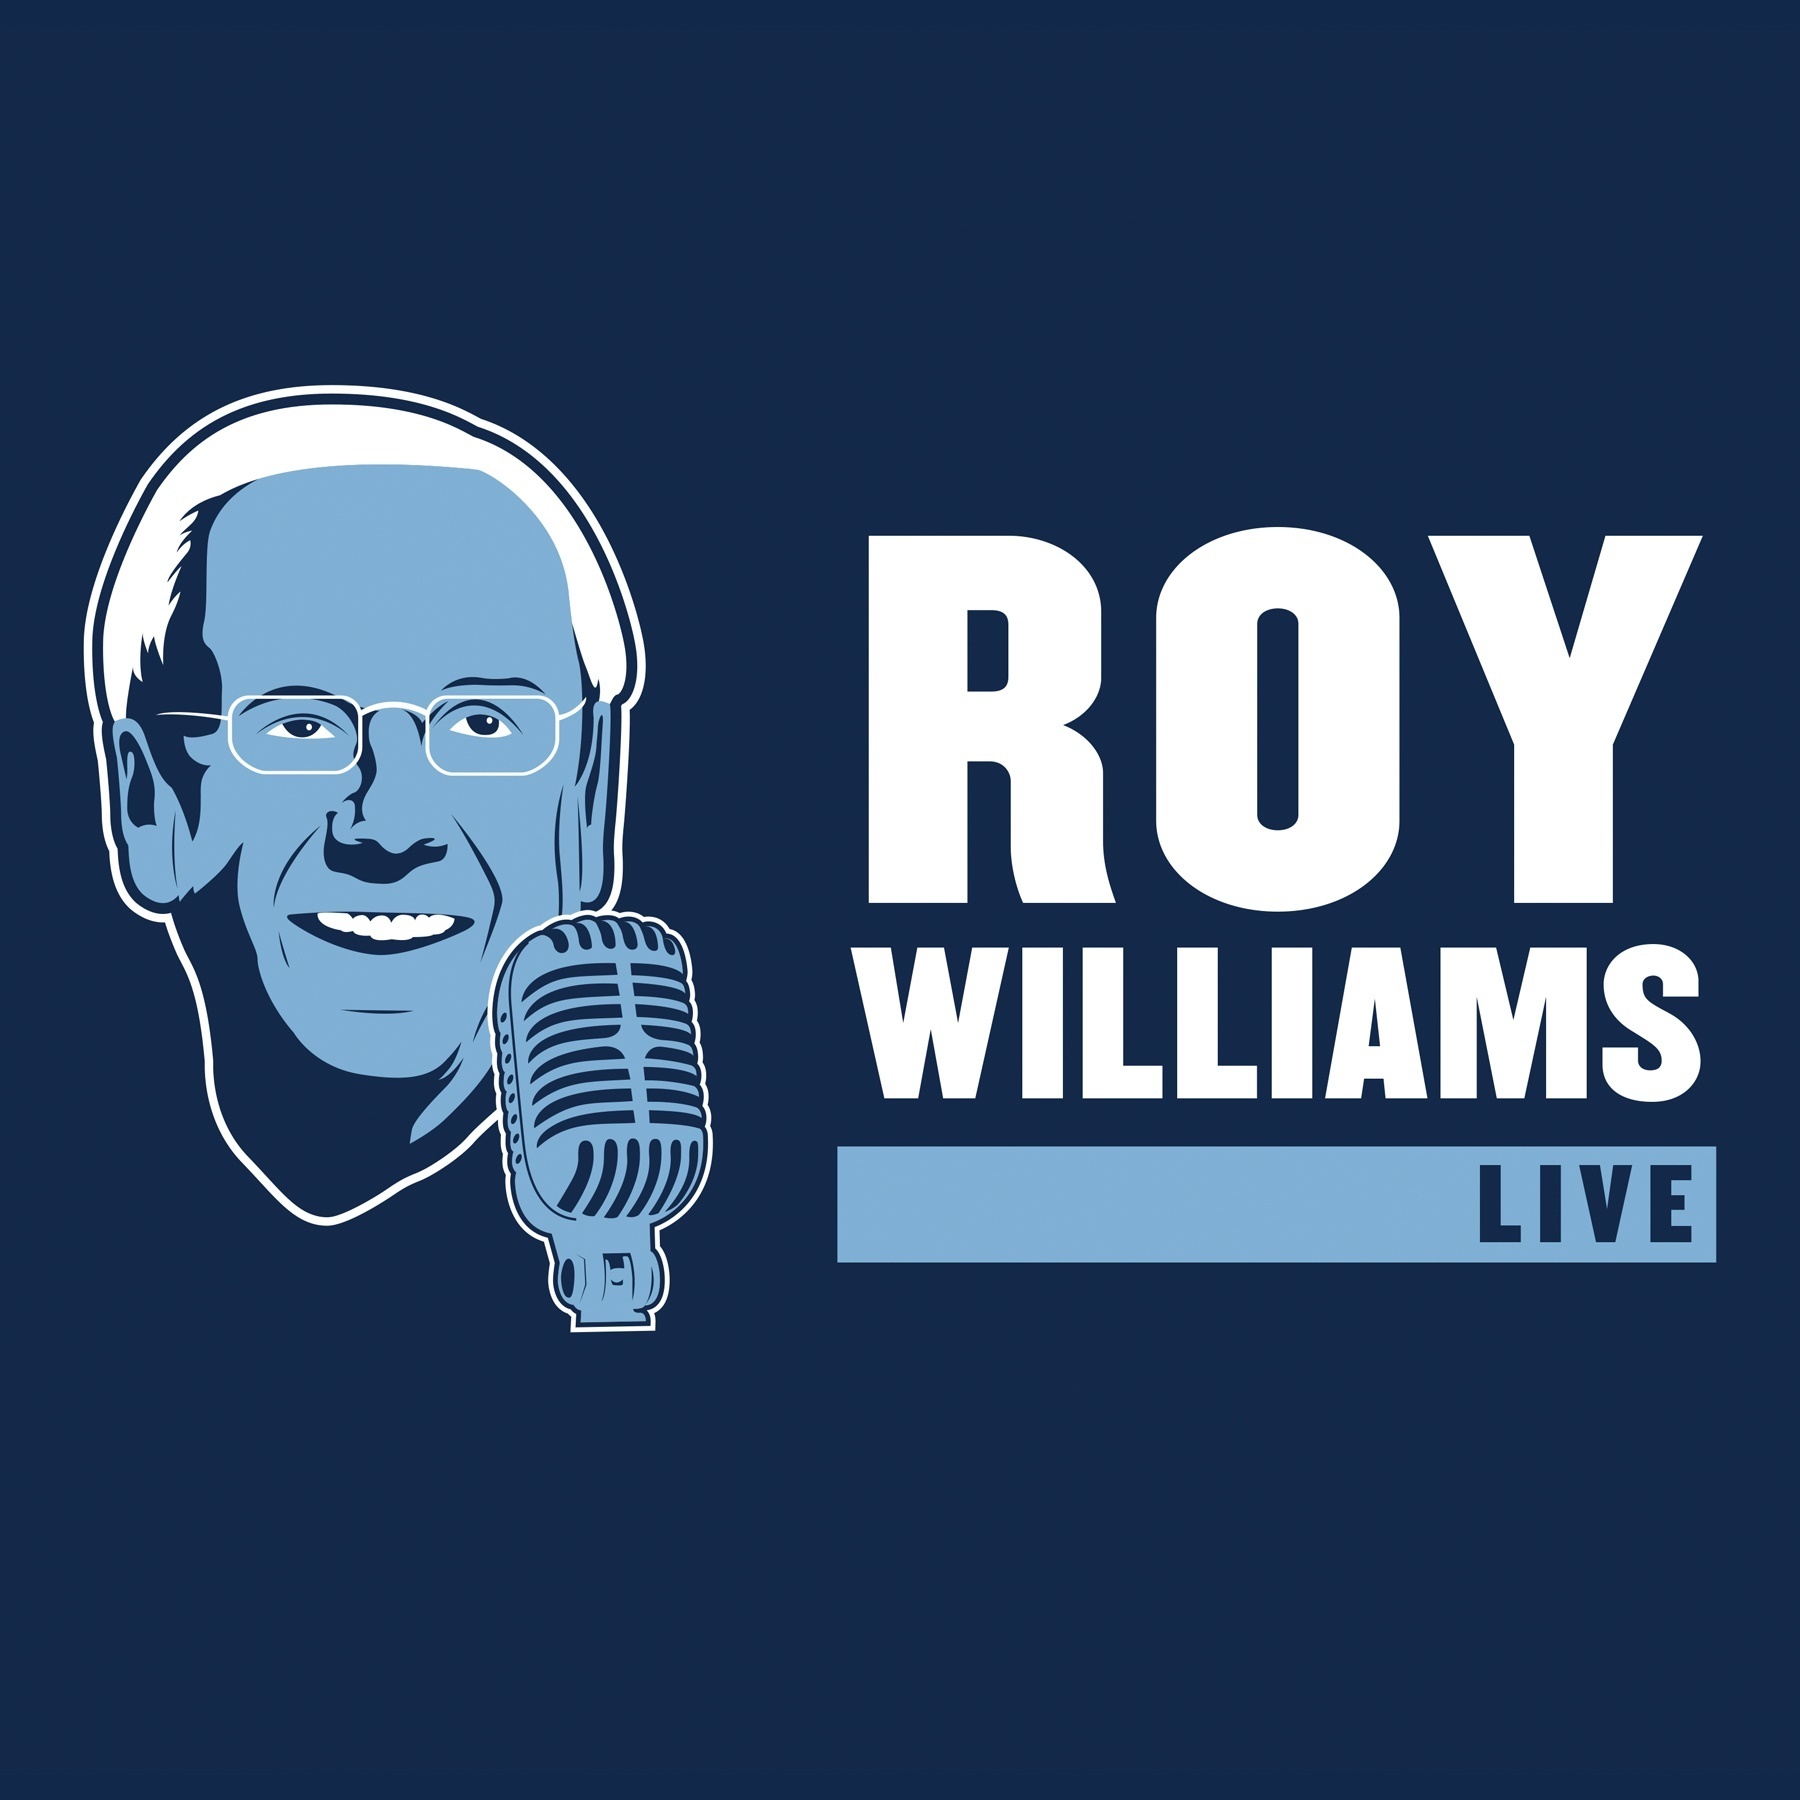 Roy Williams Live from 11-6-17